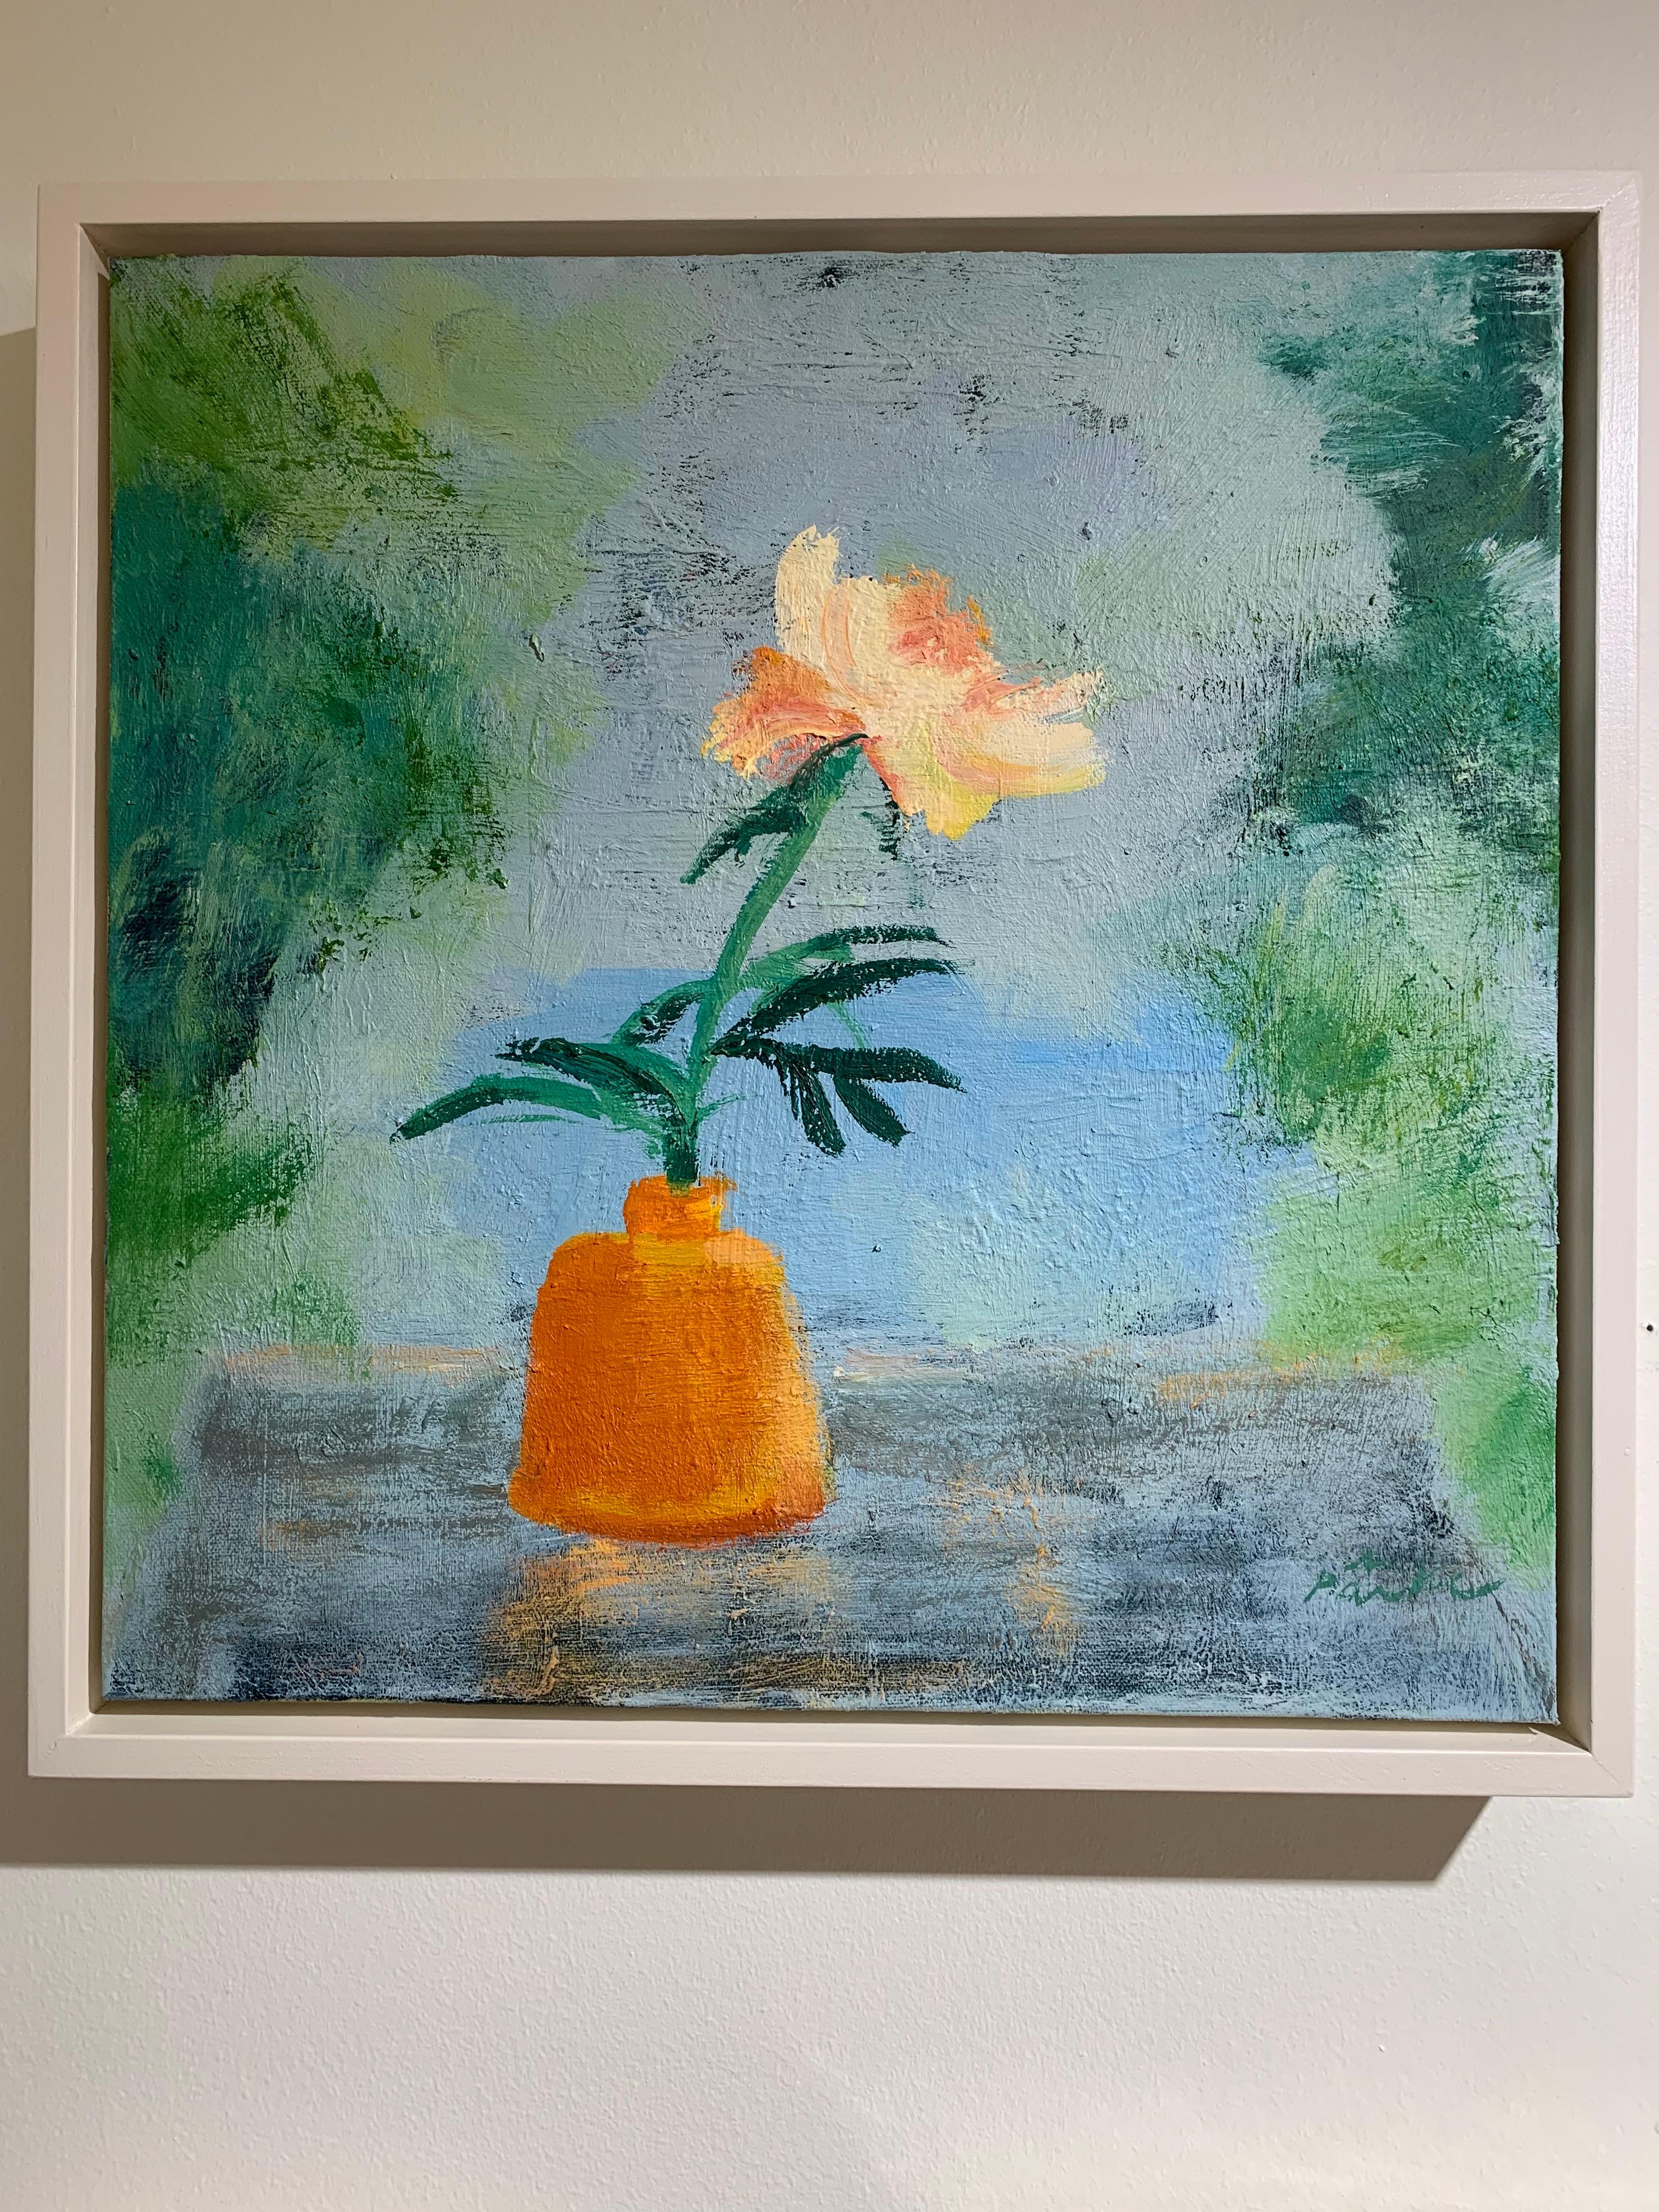 Stone Fruit, impressionist floral still life oil painting, 2019 - Painting by Melanie Parke